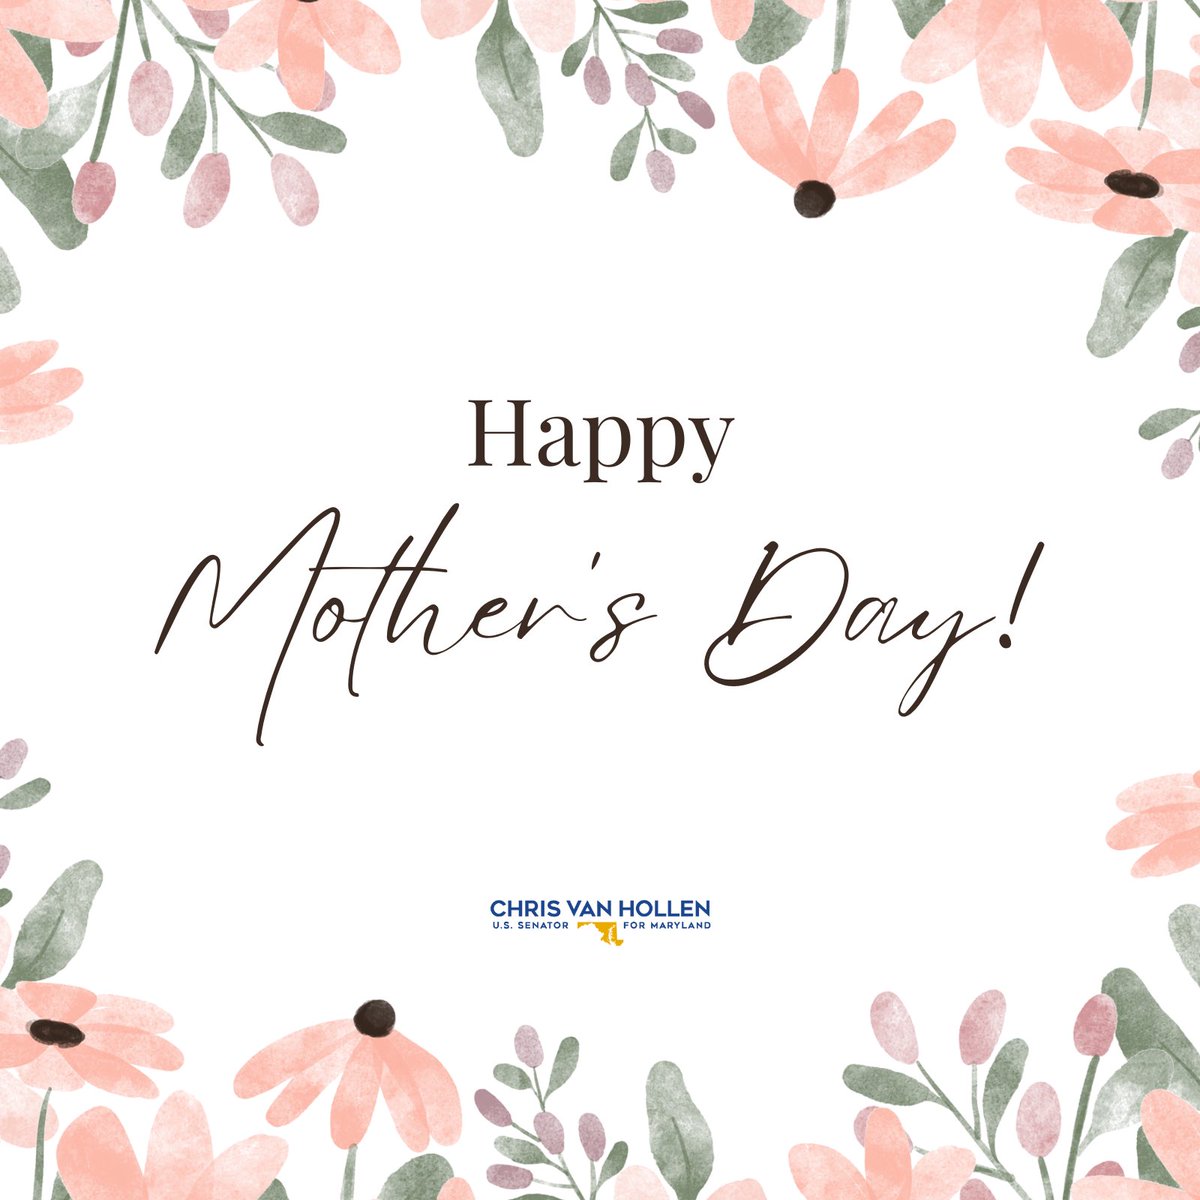 Wishing a very happy #MothersDay to all the moms in Maryland and across the country!